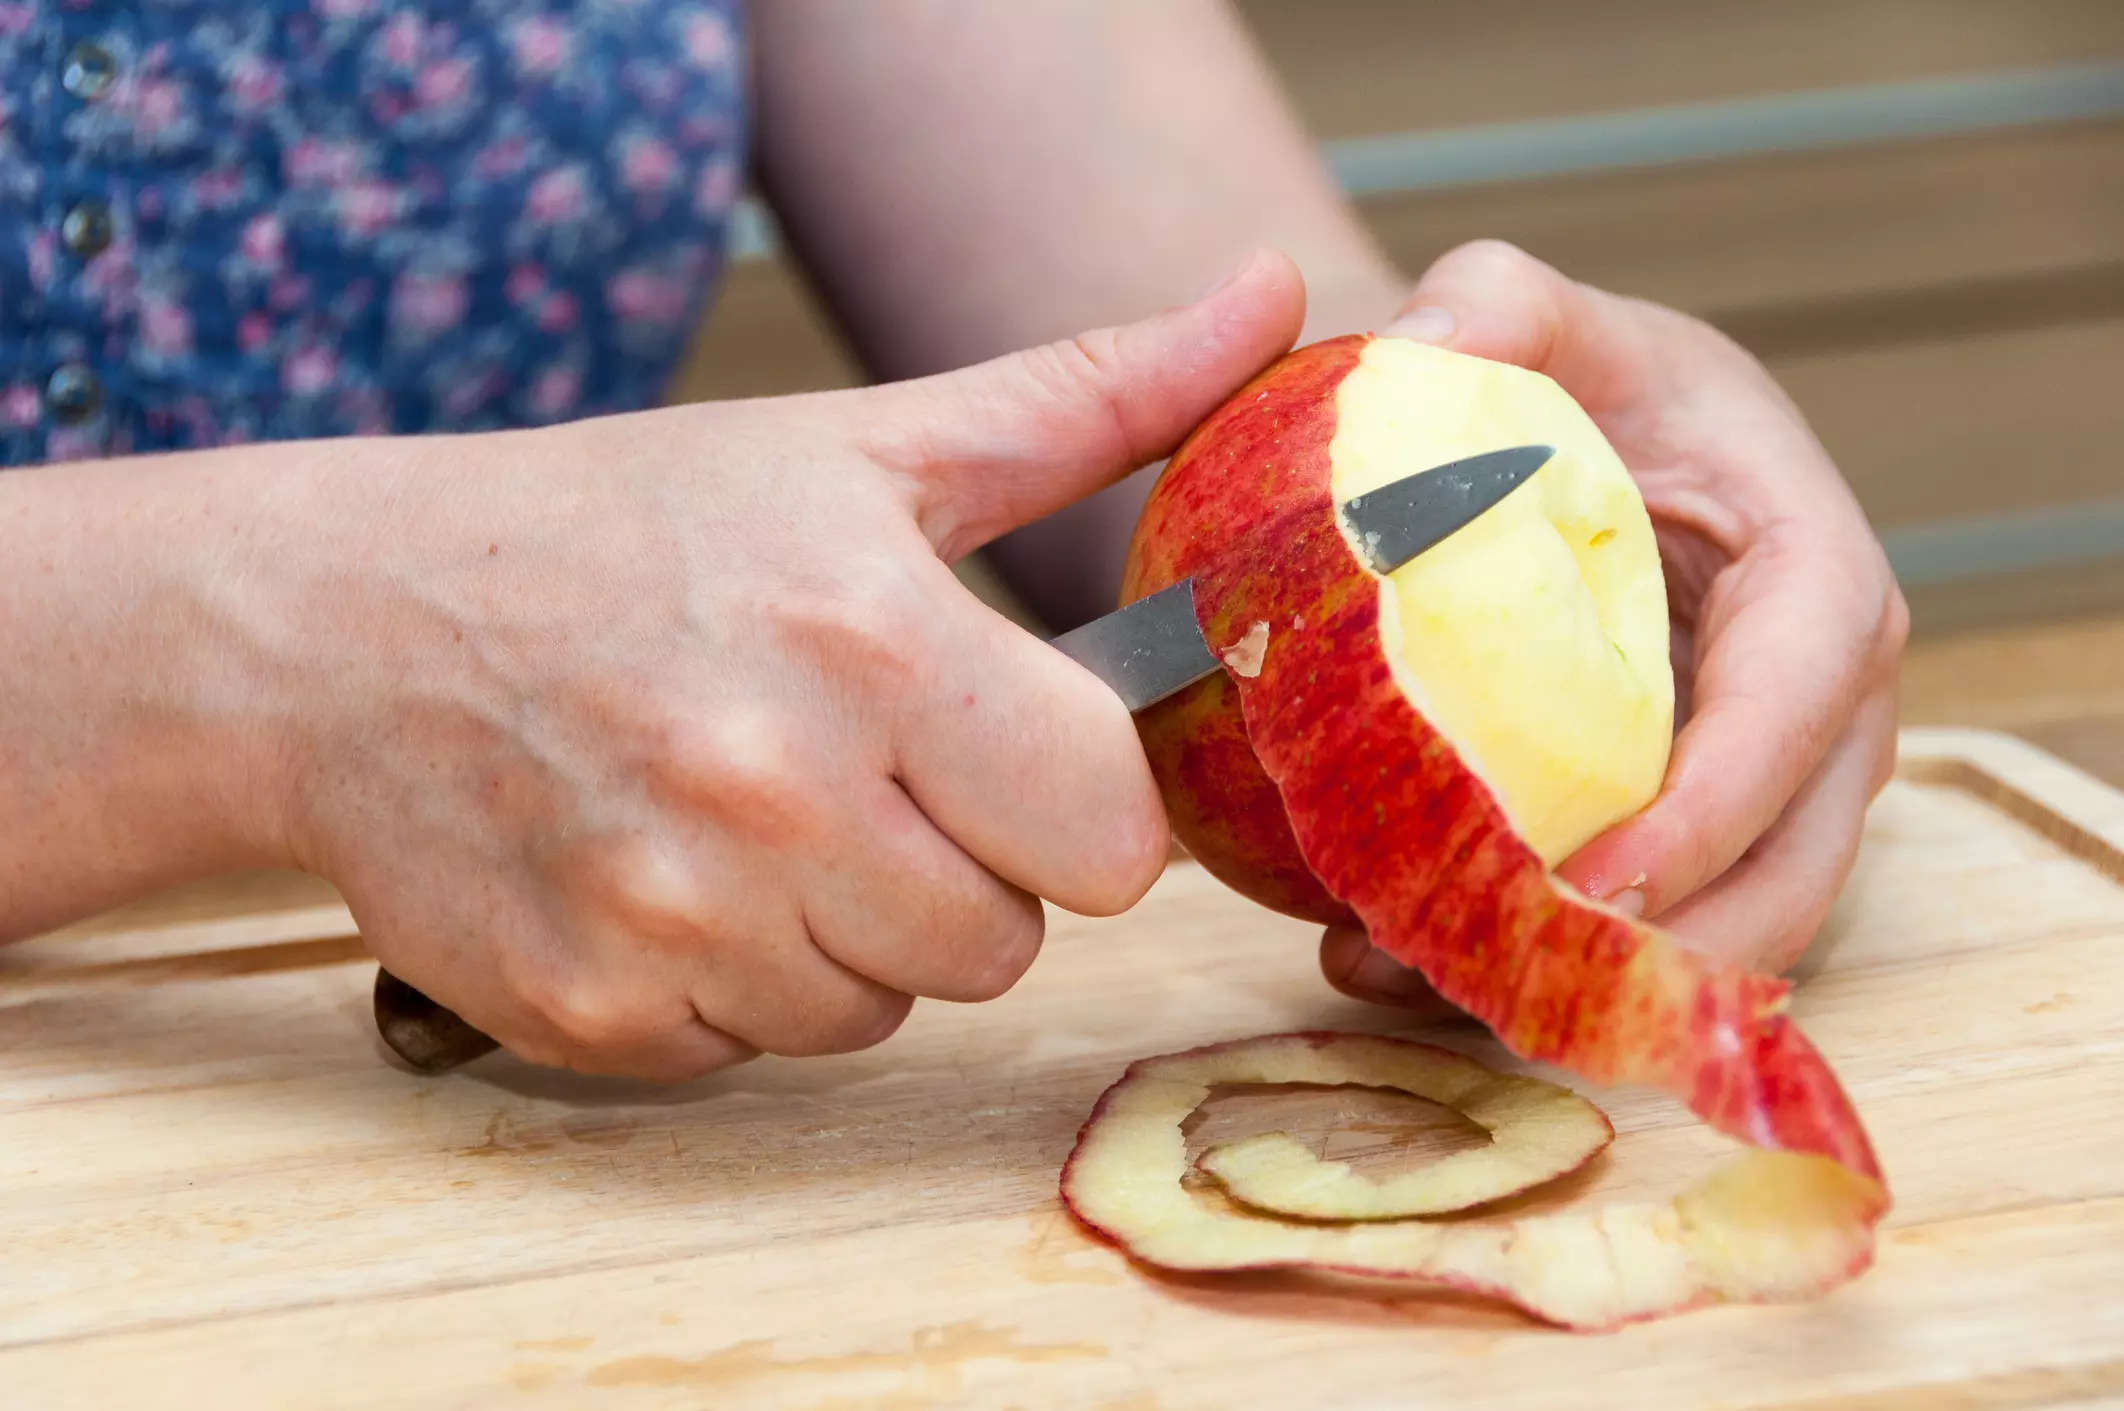 Apple peel contains quercetin, an anti-inflammatory compound that protects the lungs from several diseases.